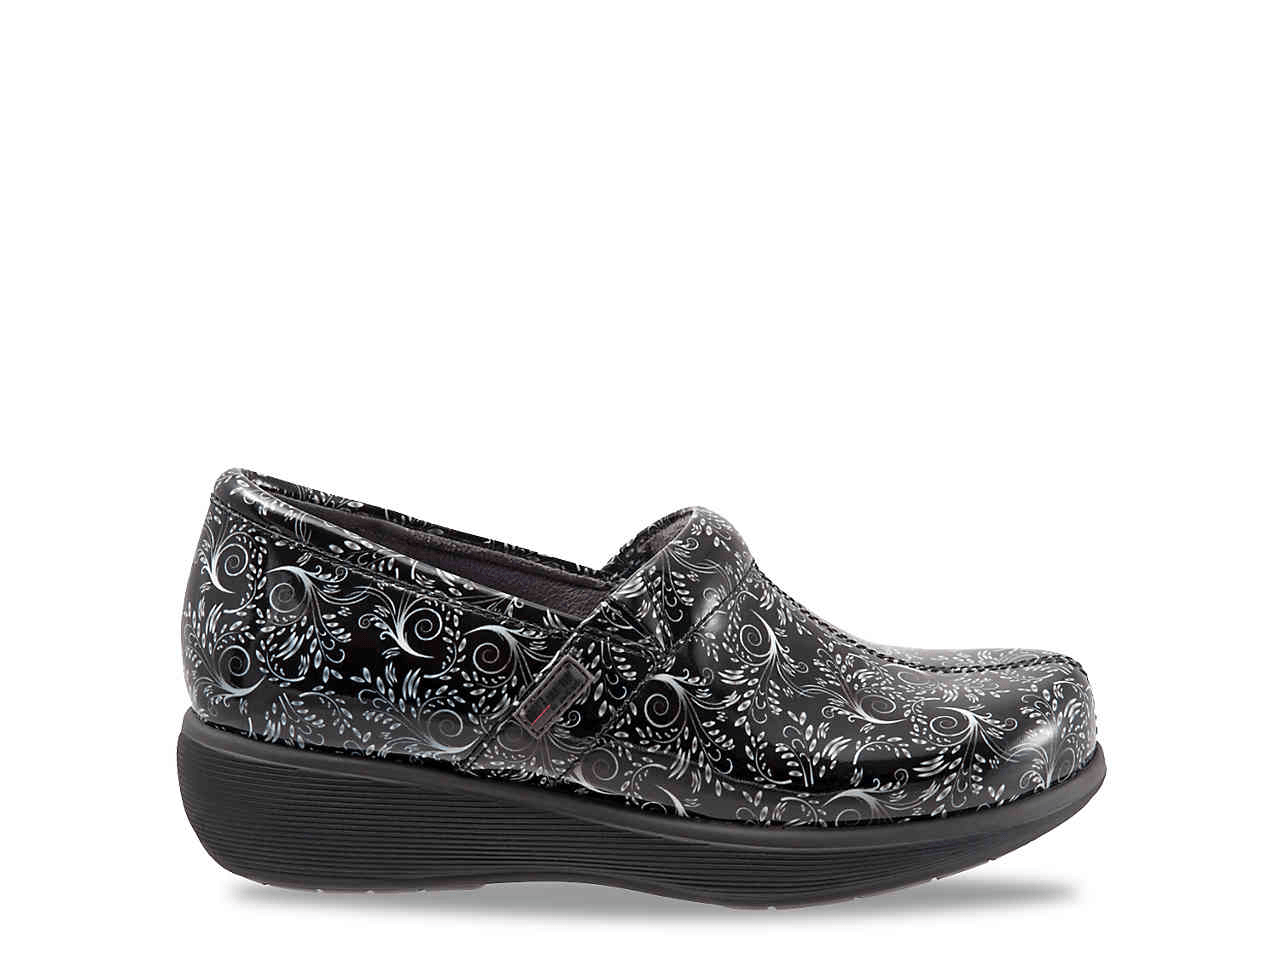 Grey's Anatomy by Softwalk Meredith Work Clog review